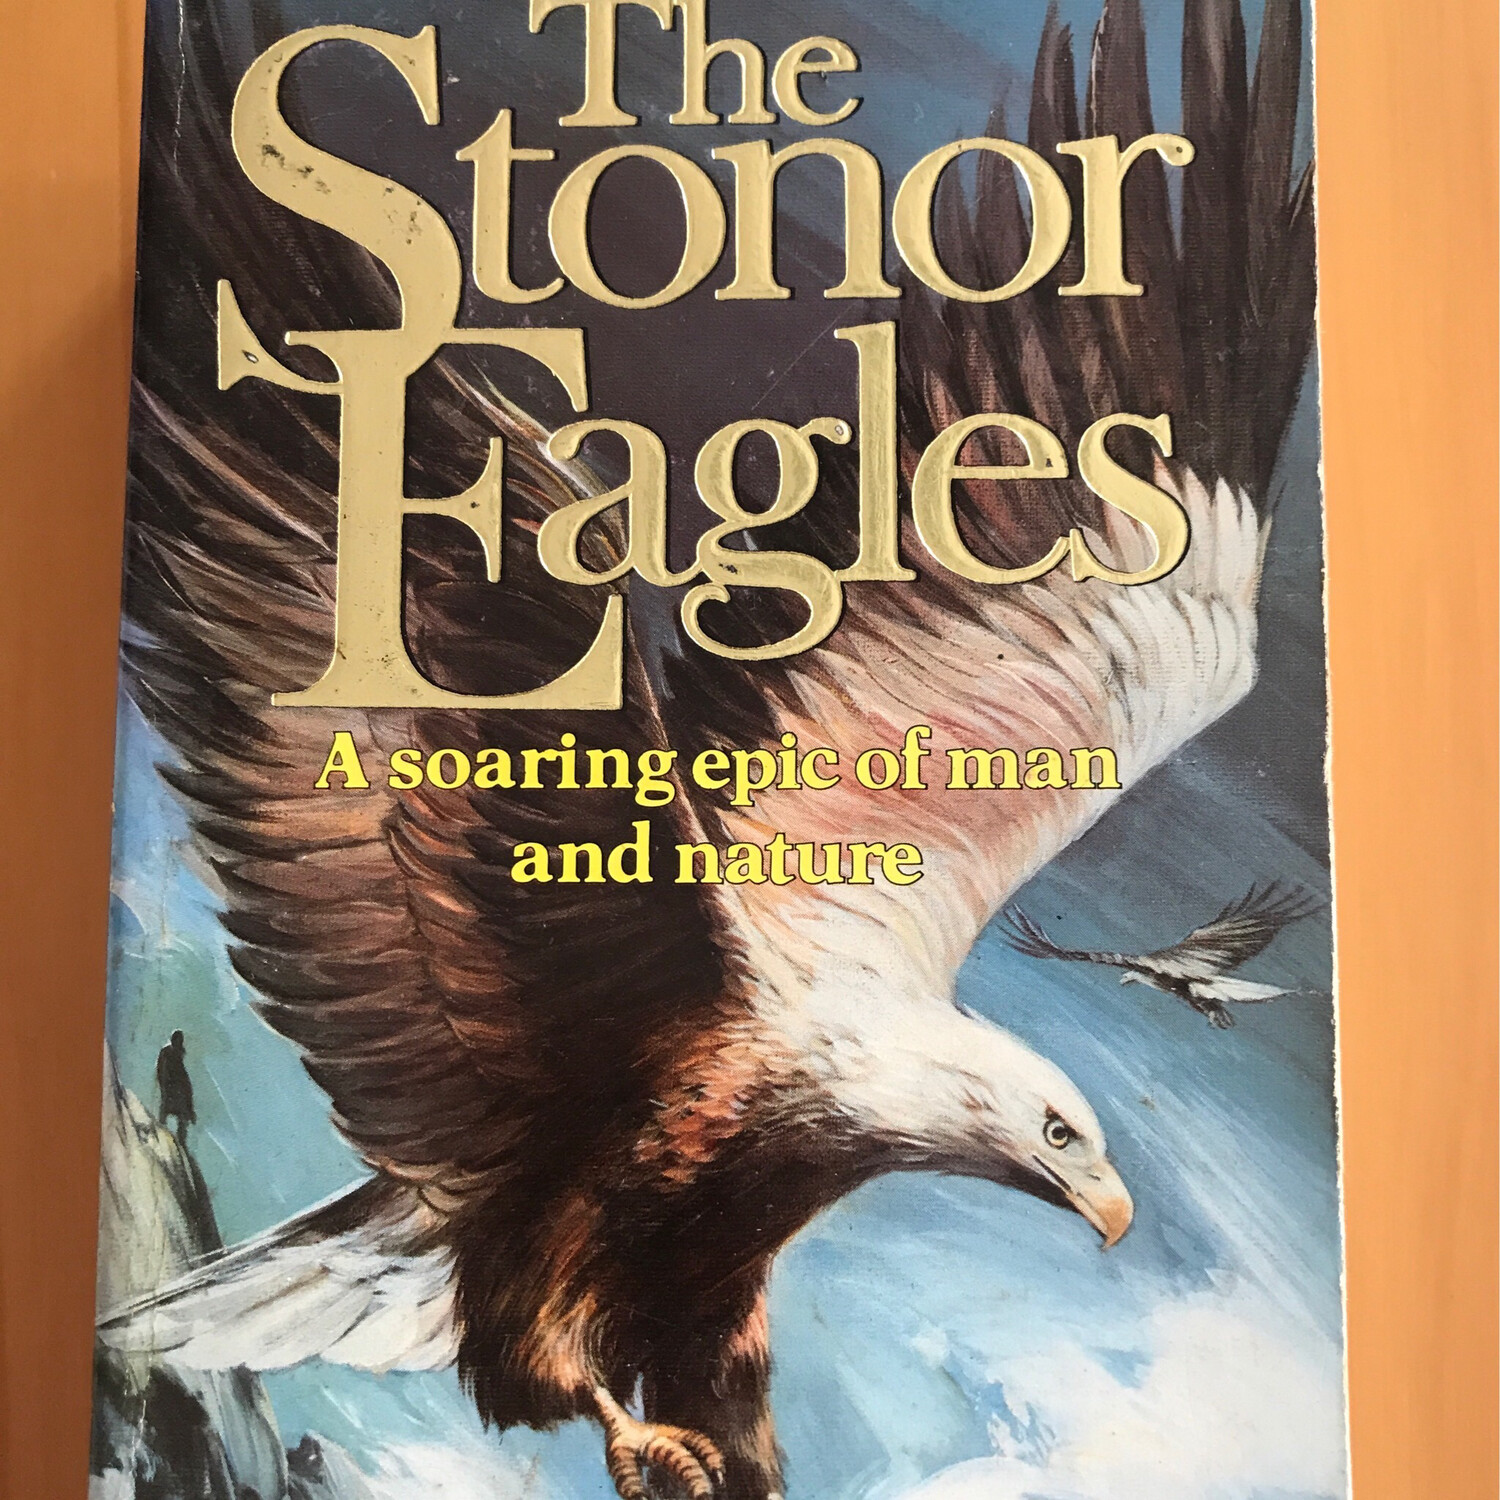 The Stonor Eagles, William Horwood